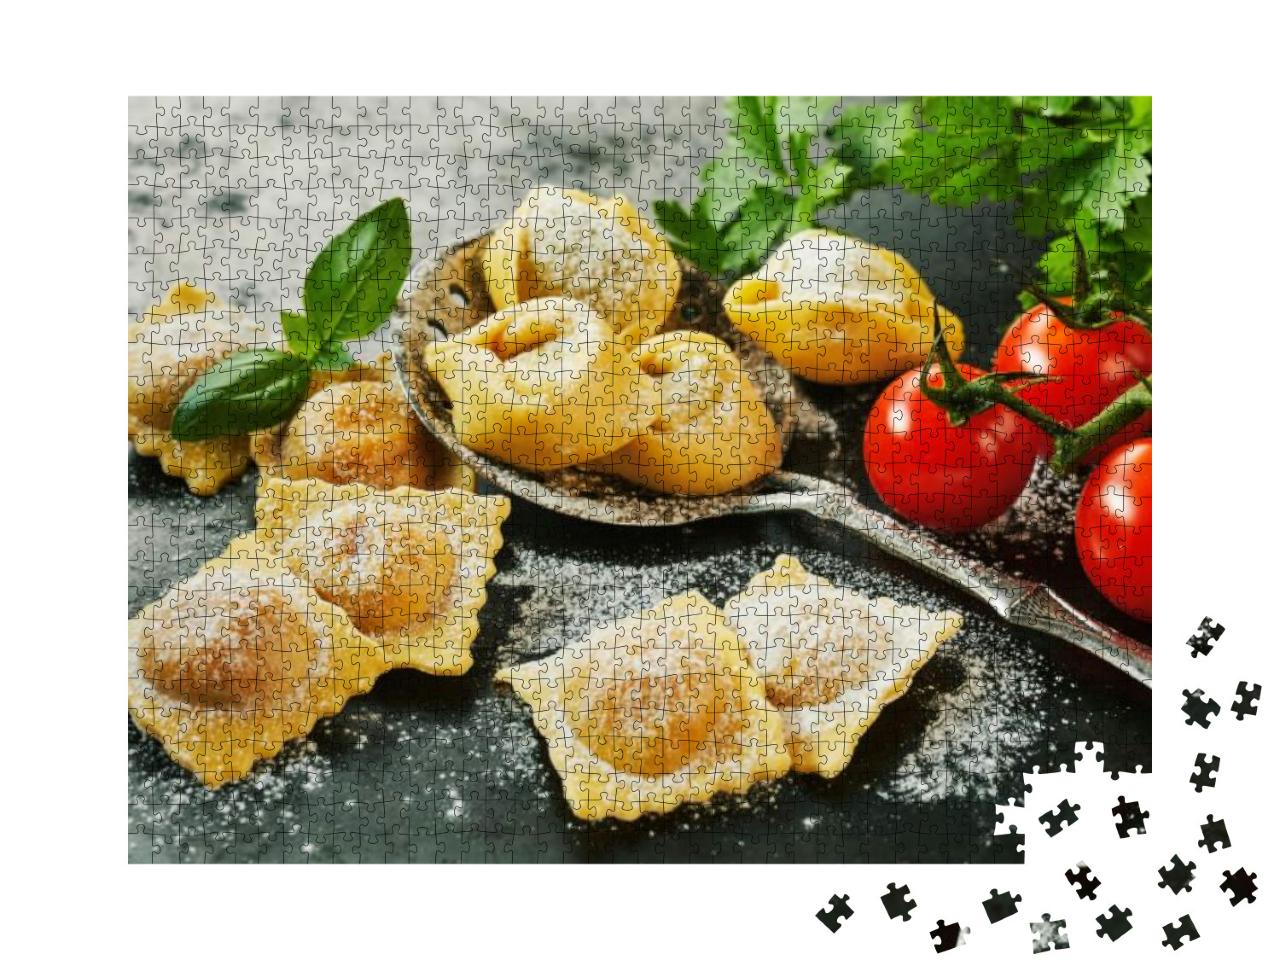 Homemade Uncooked Freshly Prepared Italian Ravioli Pasta... Jigsaw Puzzle with 1000 pieces